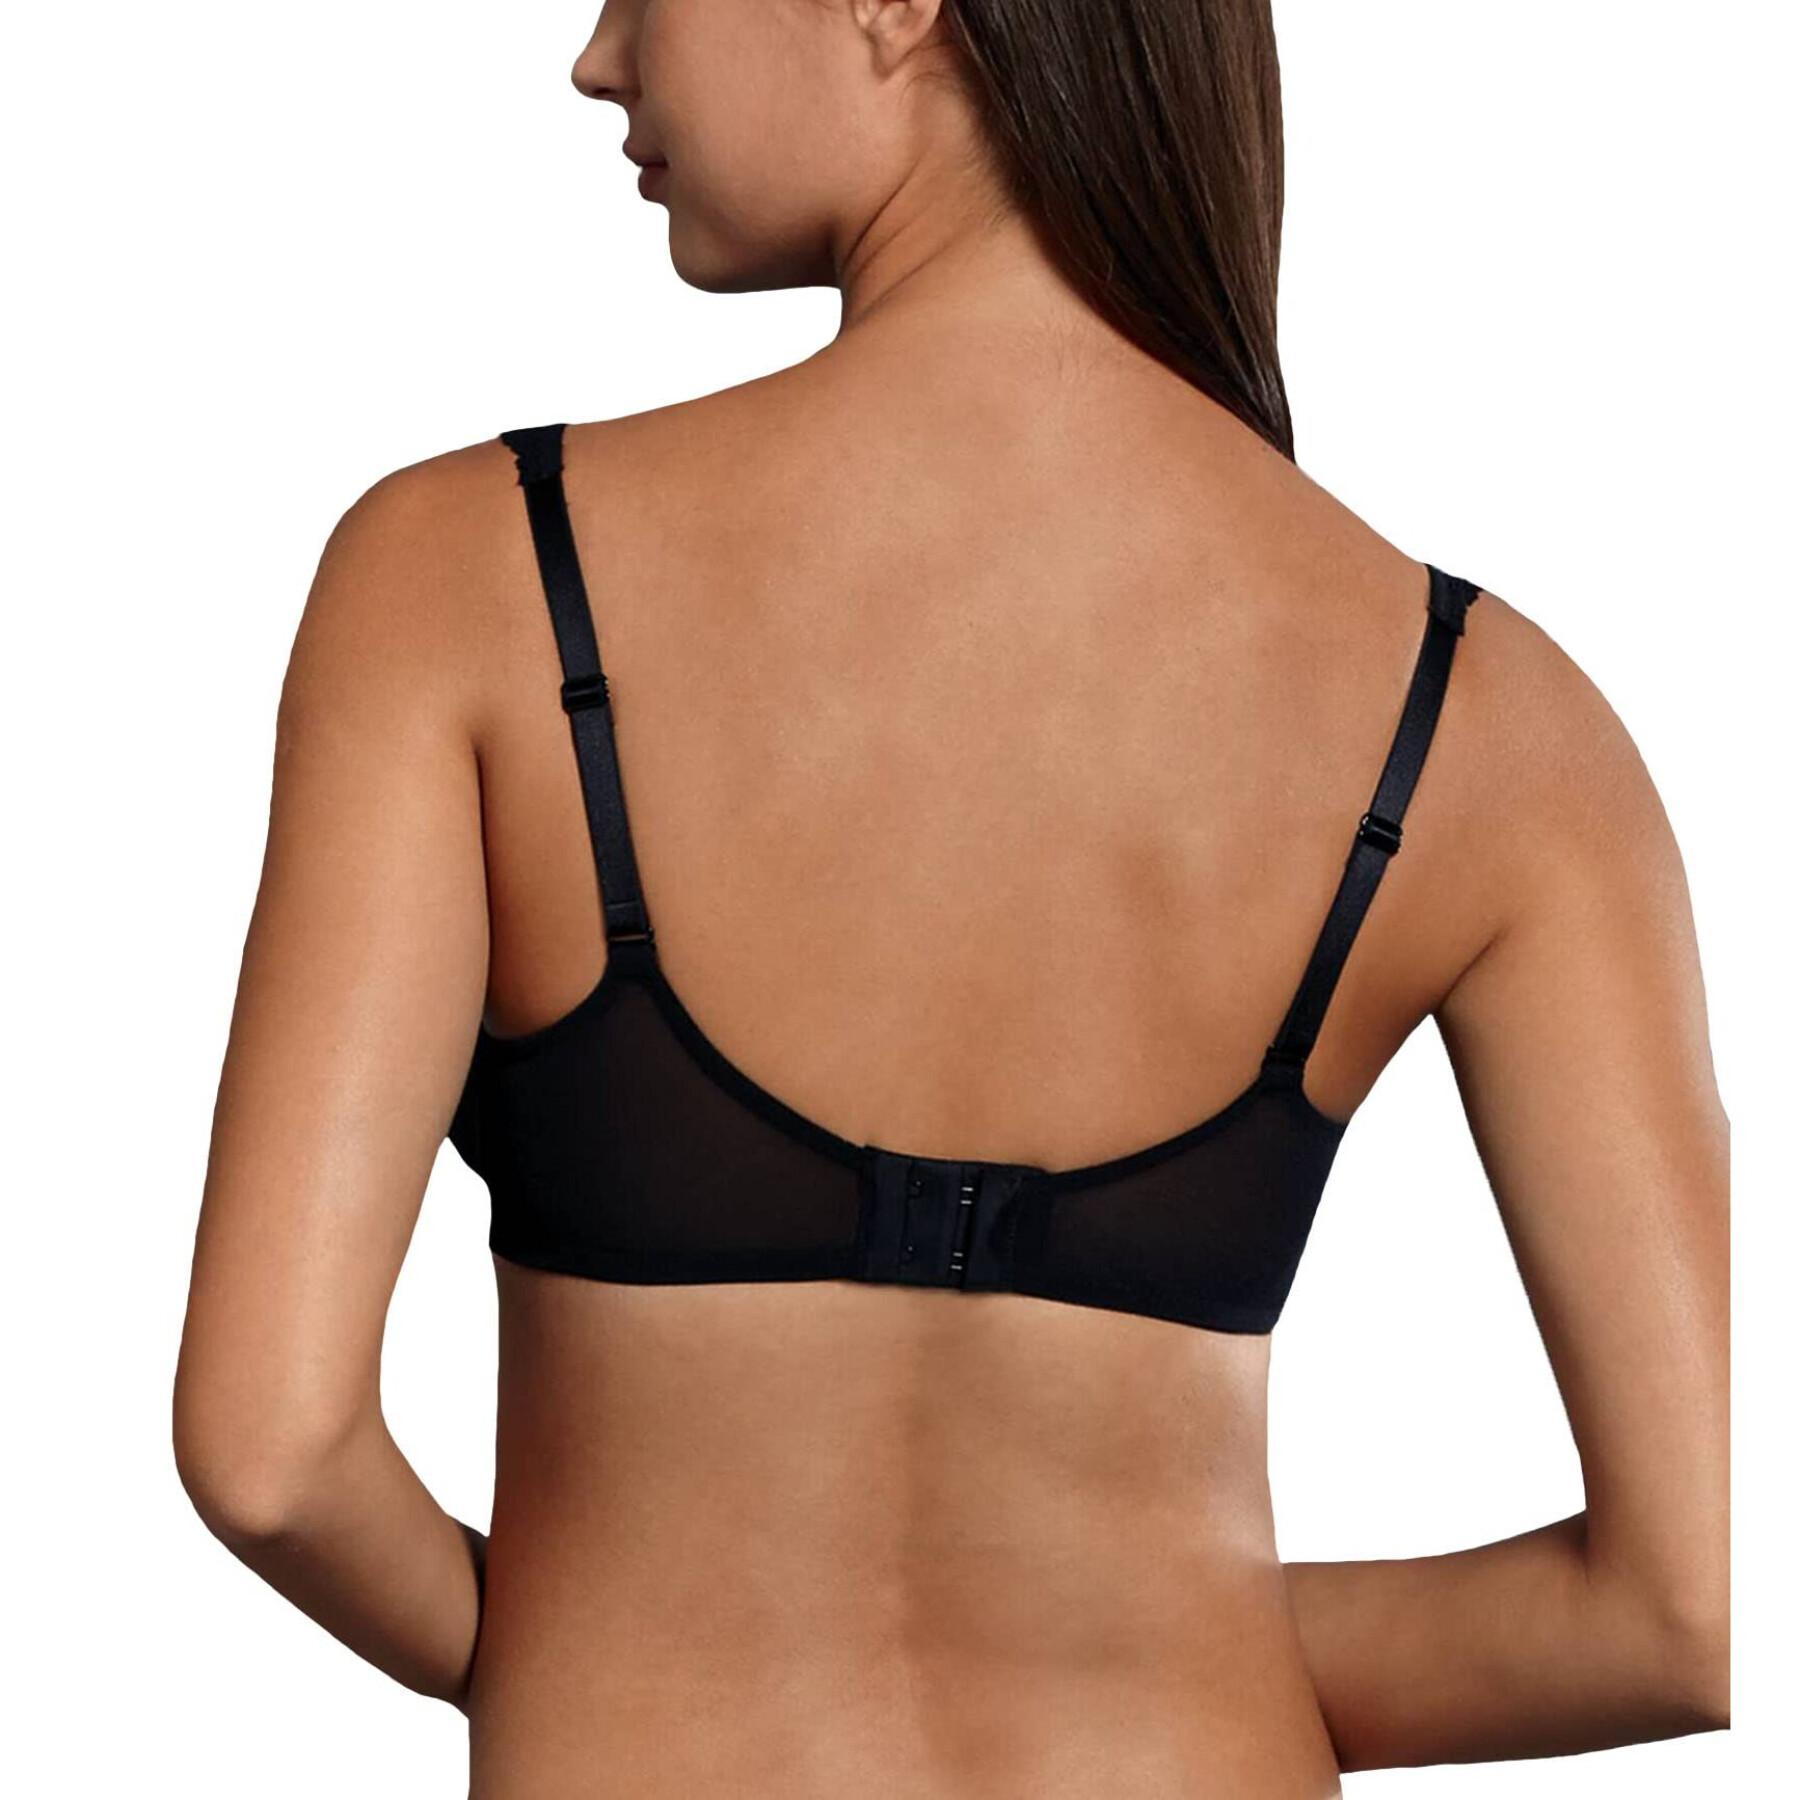 Underwired bra with cups for women Anita selma